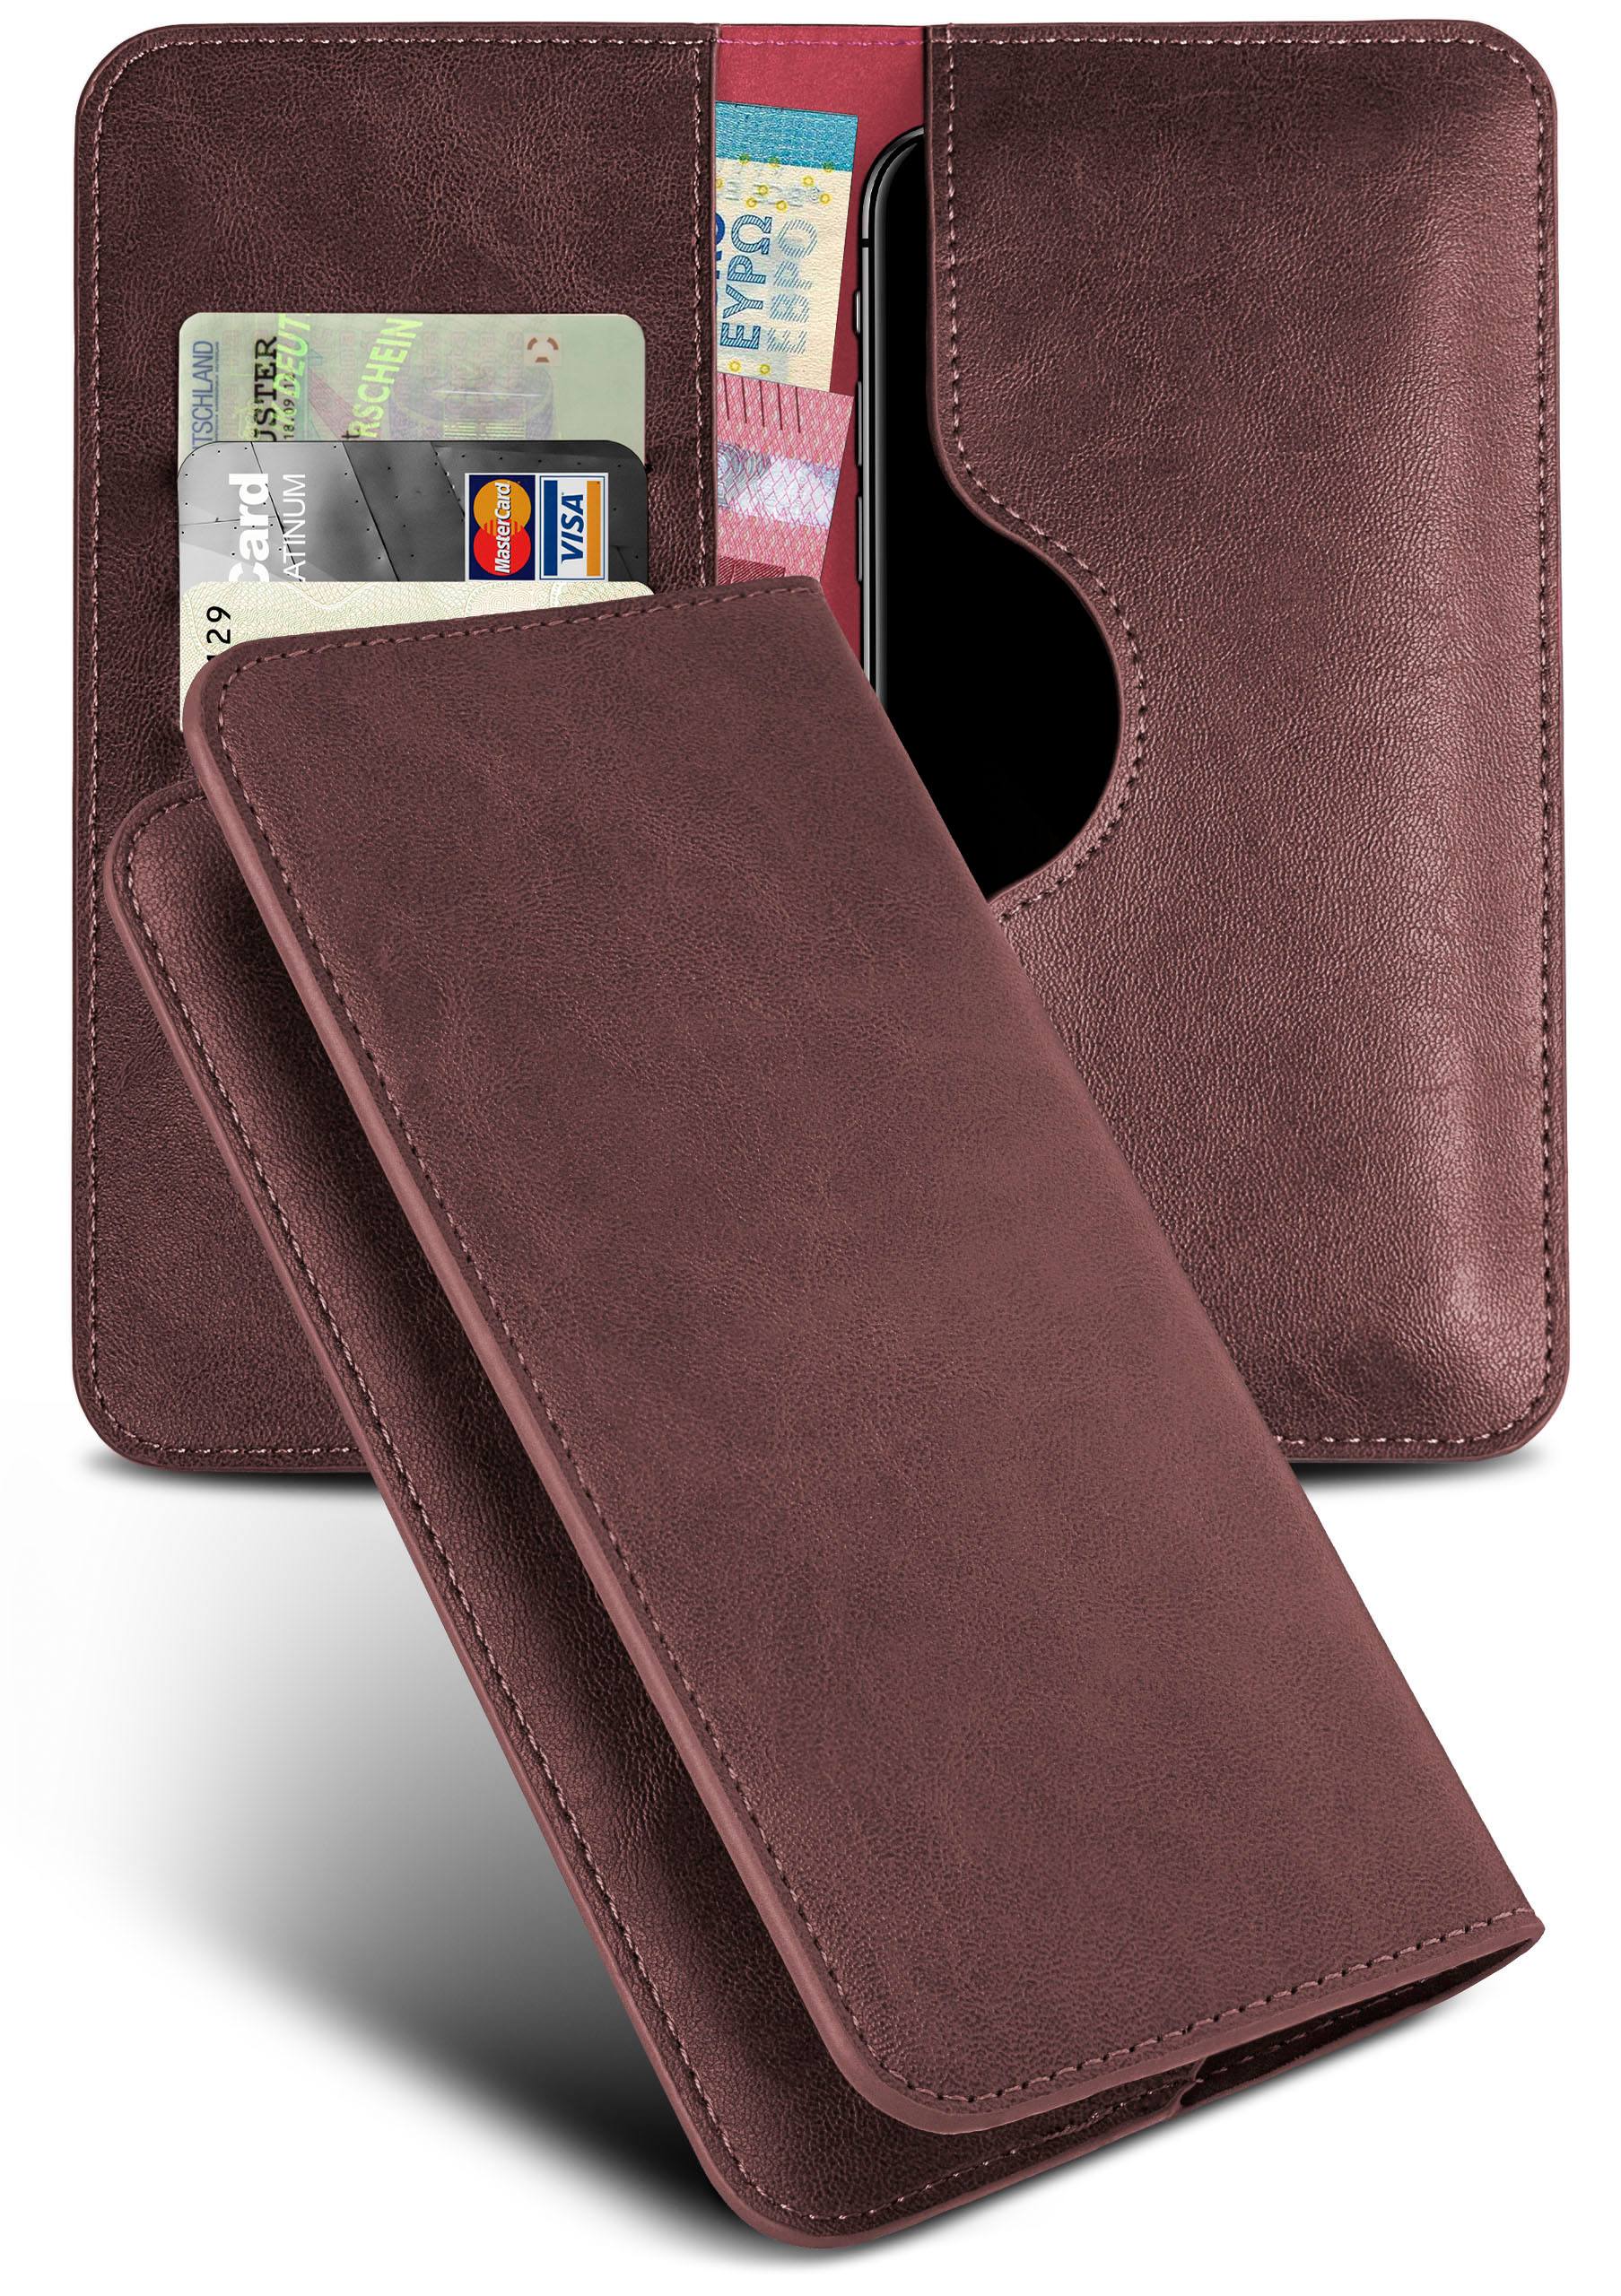 Flip MOEX Weinrot X, Cover, Xperia Case, Sony, Purse